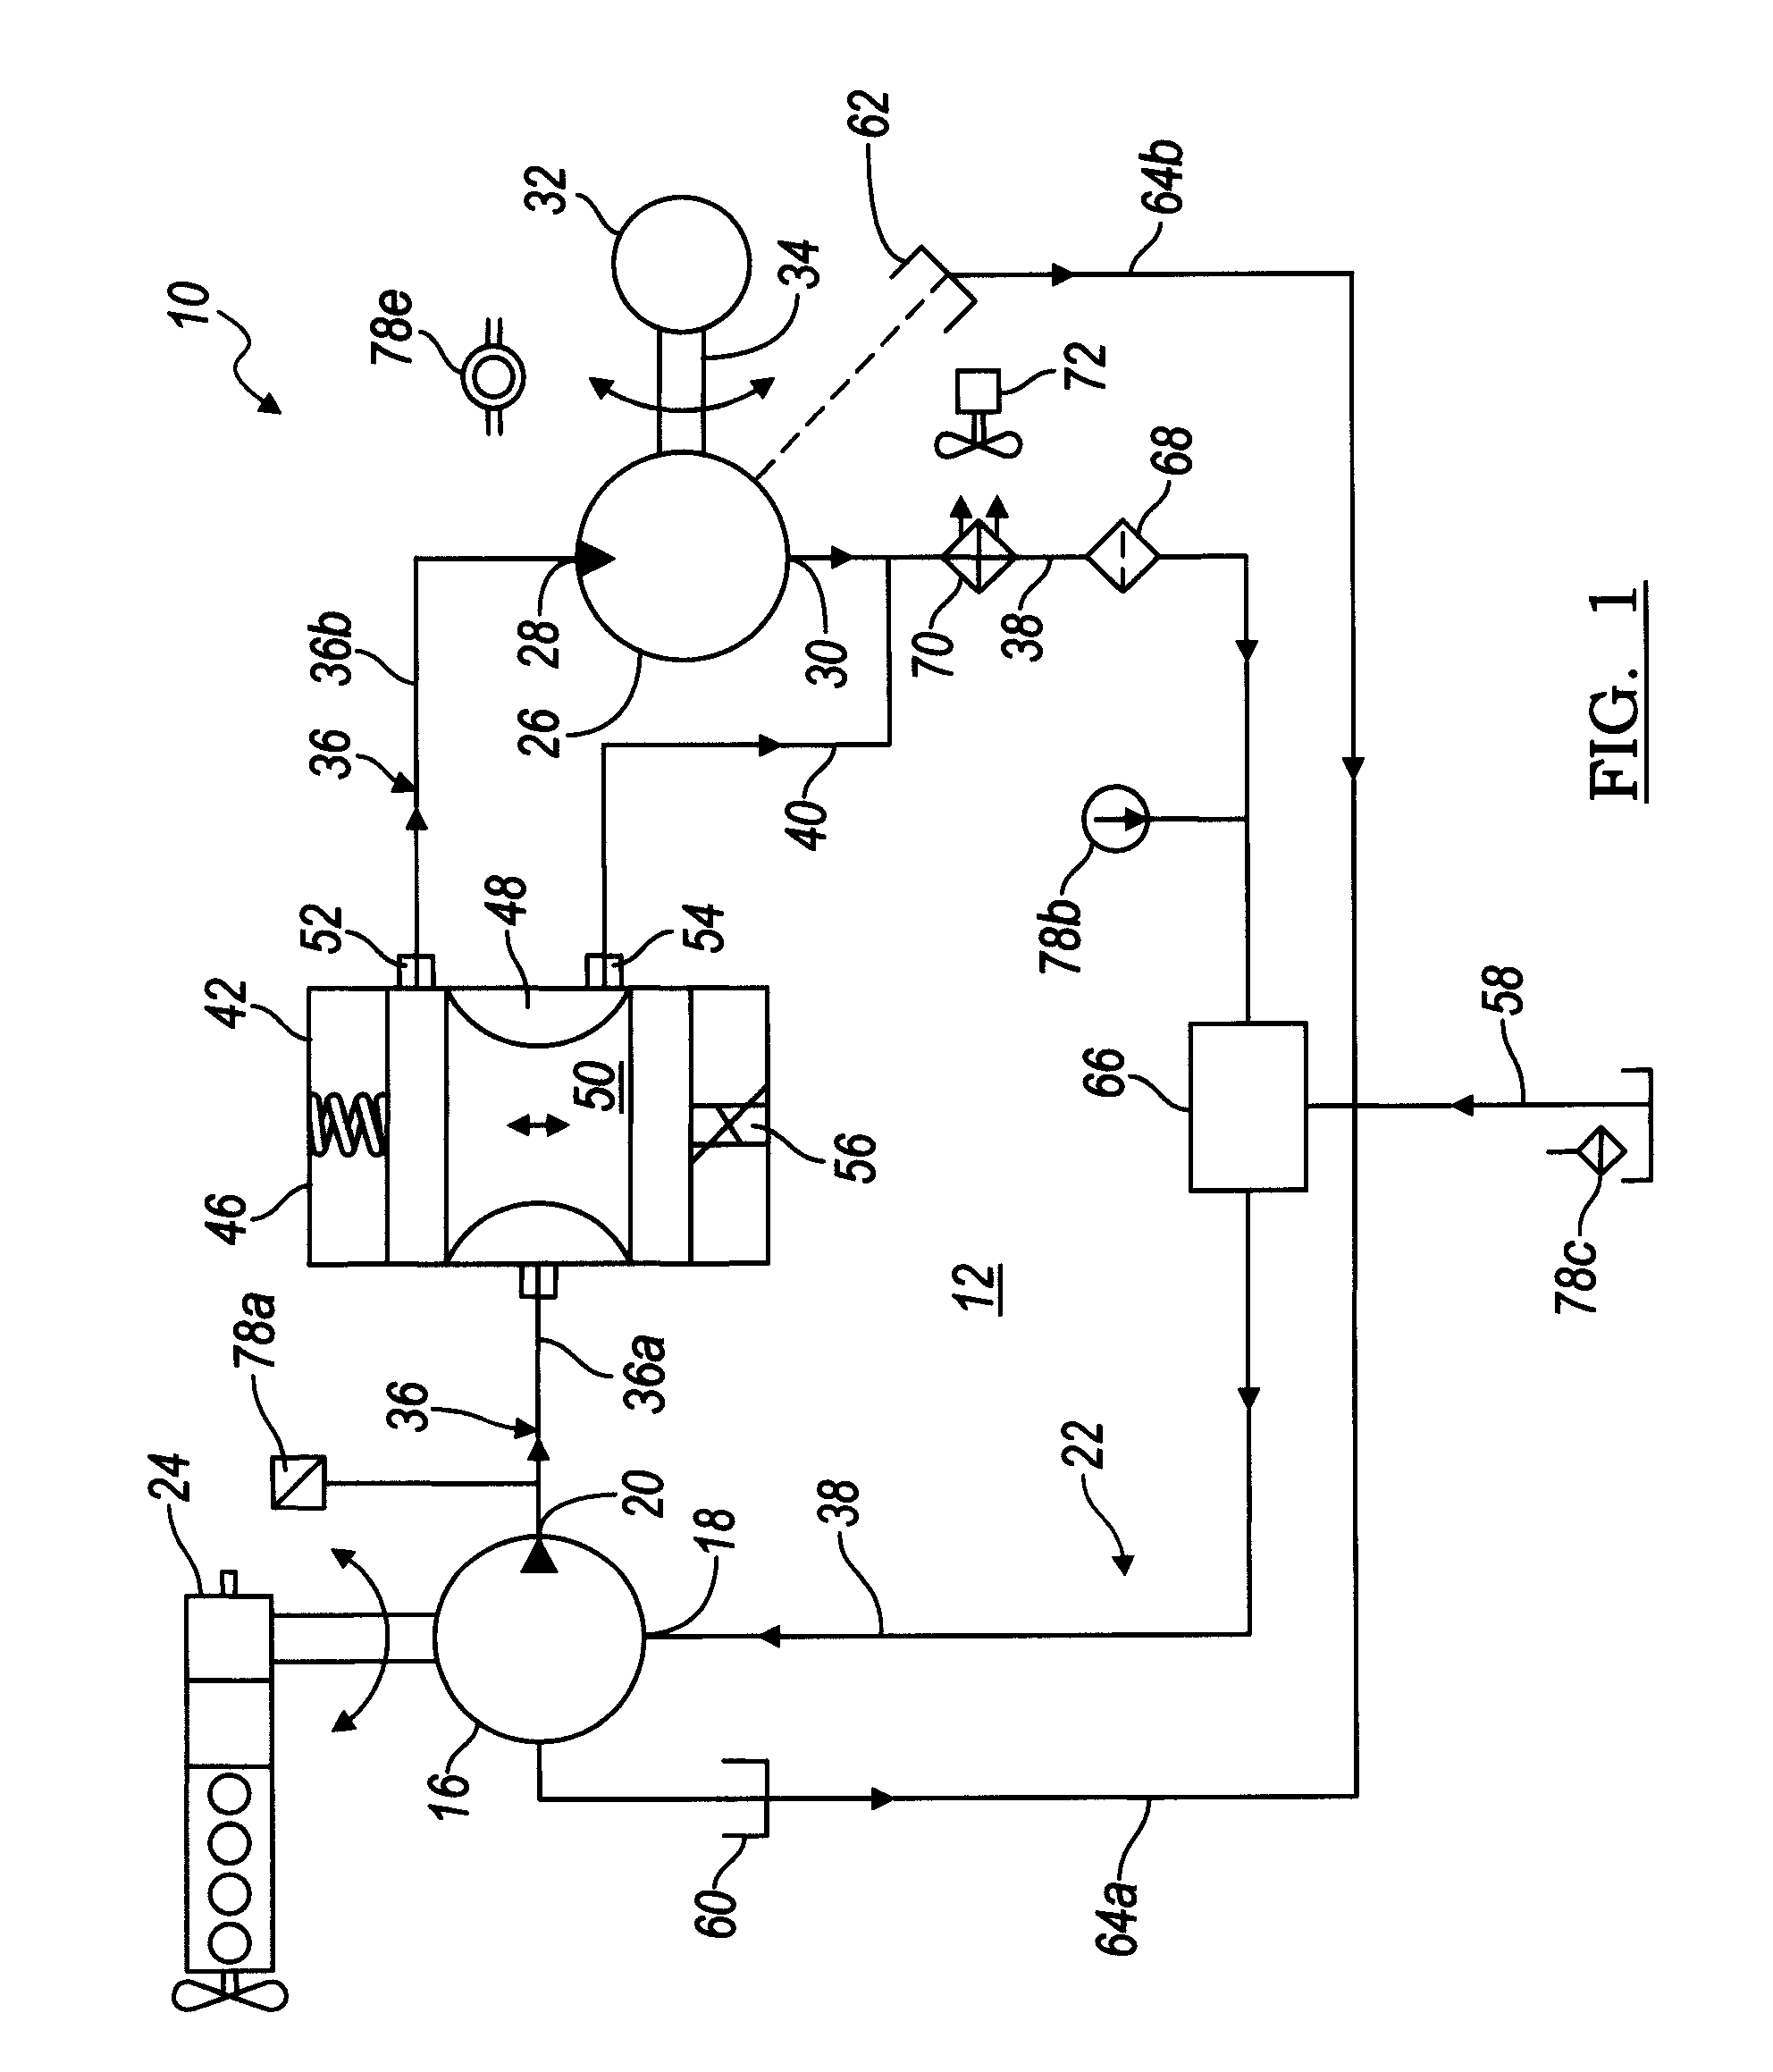 Electronic control for a hydraulically driven auxiliary power source